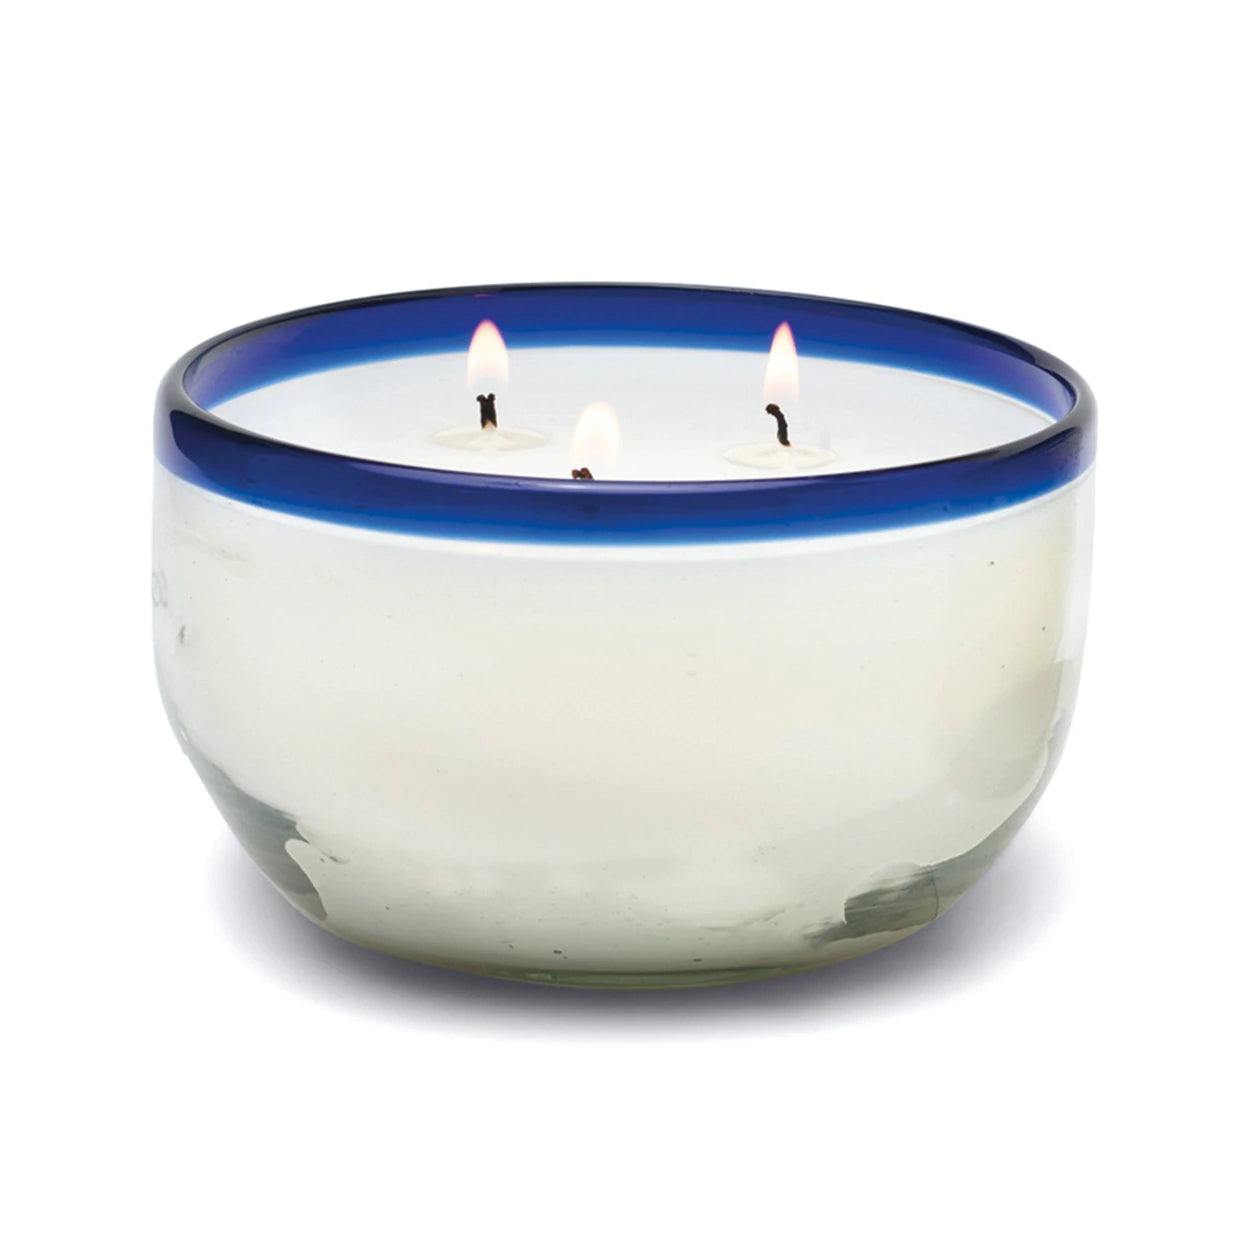 La Playa Bowl Candle - Salted Blue Agave  Paddywax   